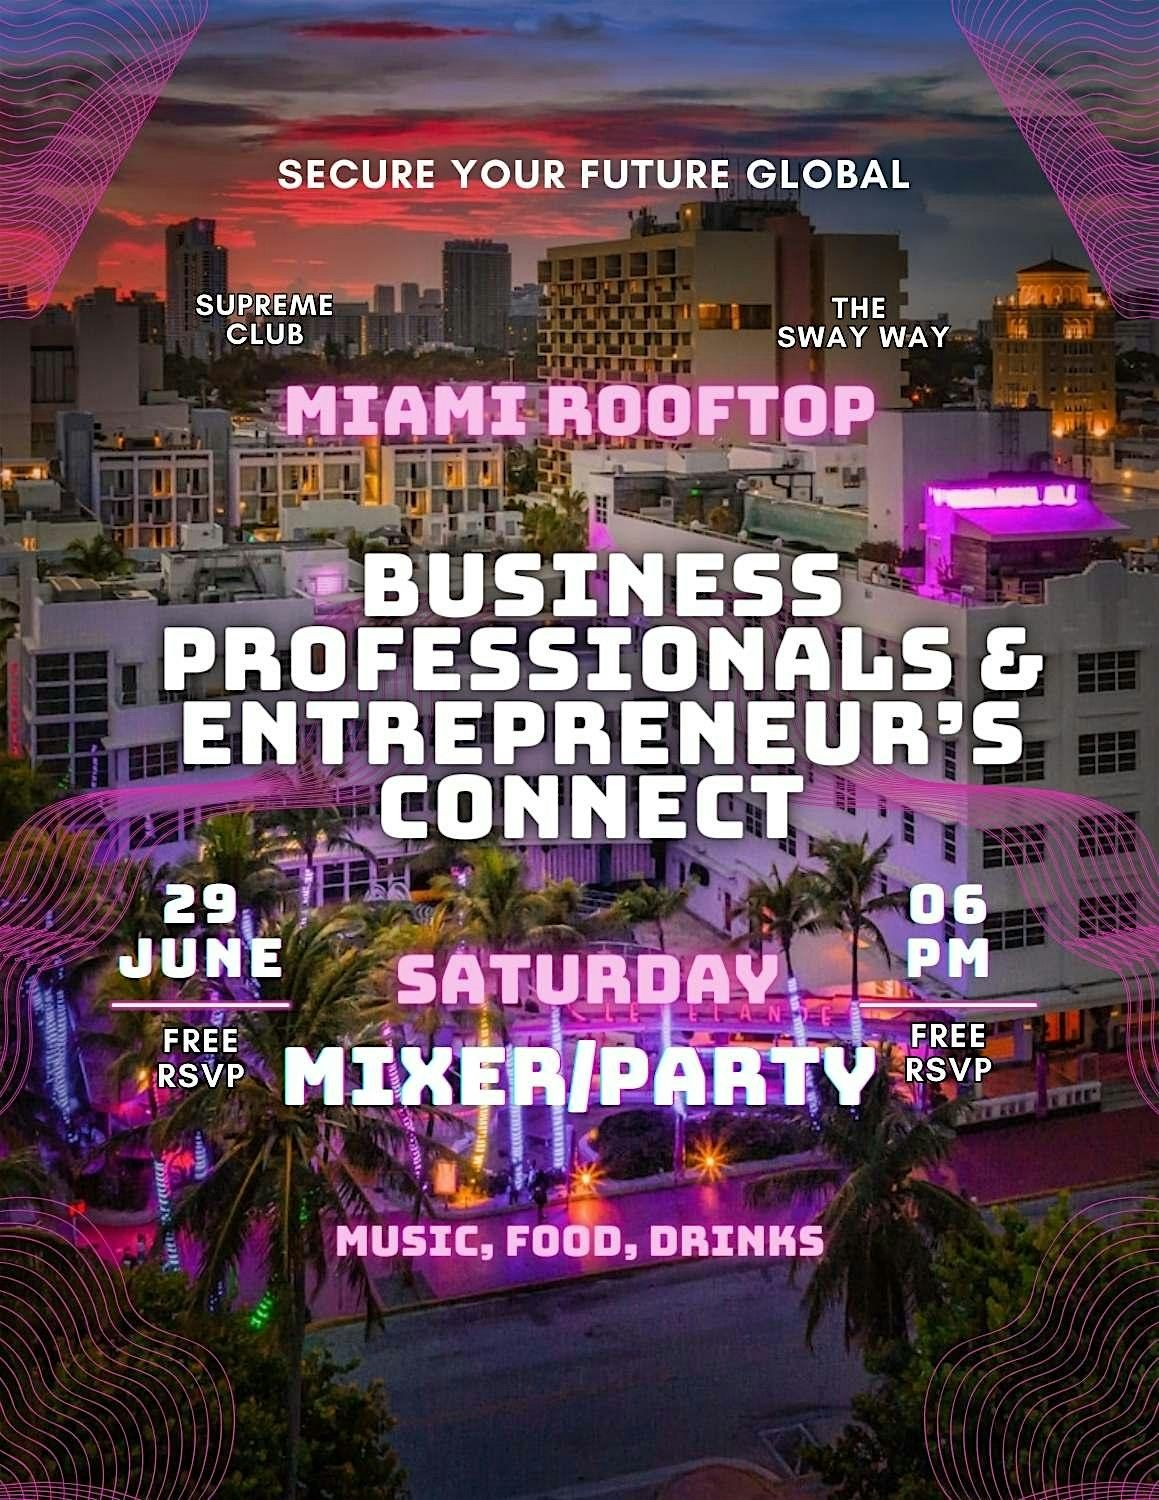 Secure Your Future Rooftop Business & Entrepreneur Networking Experience